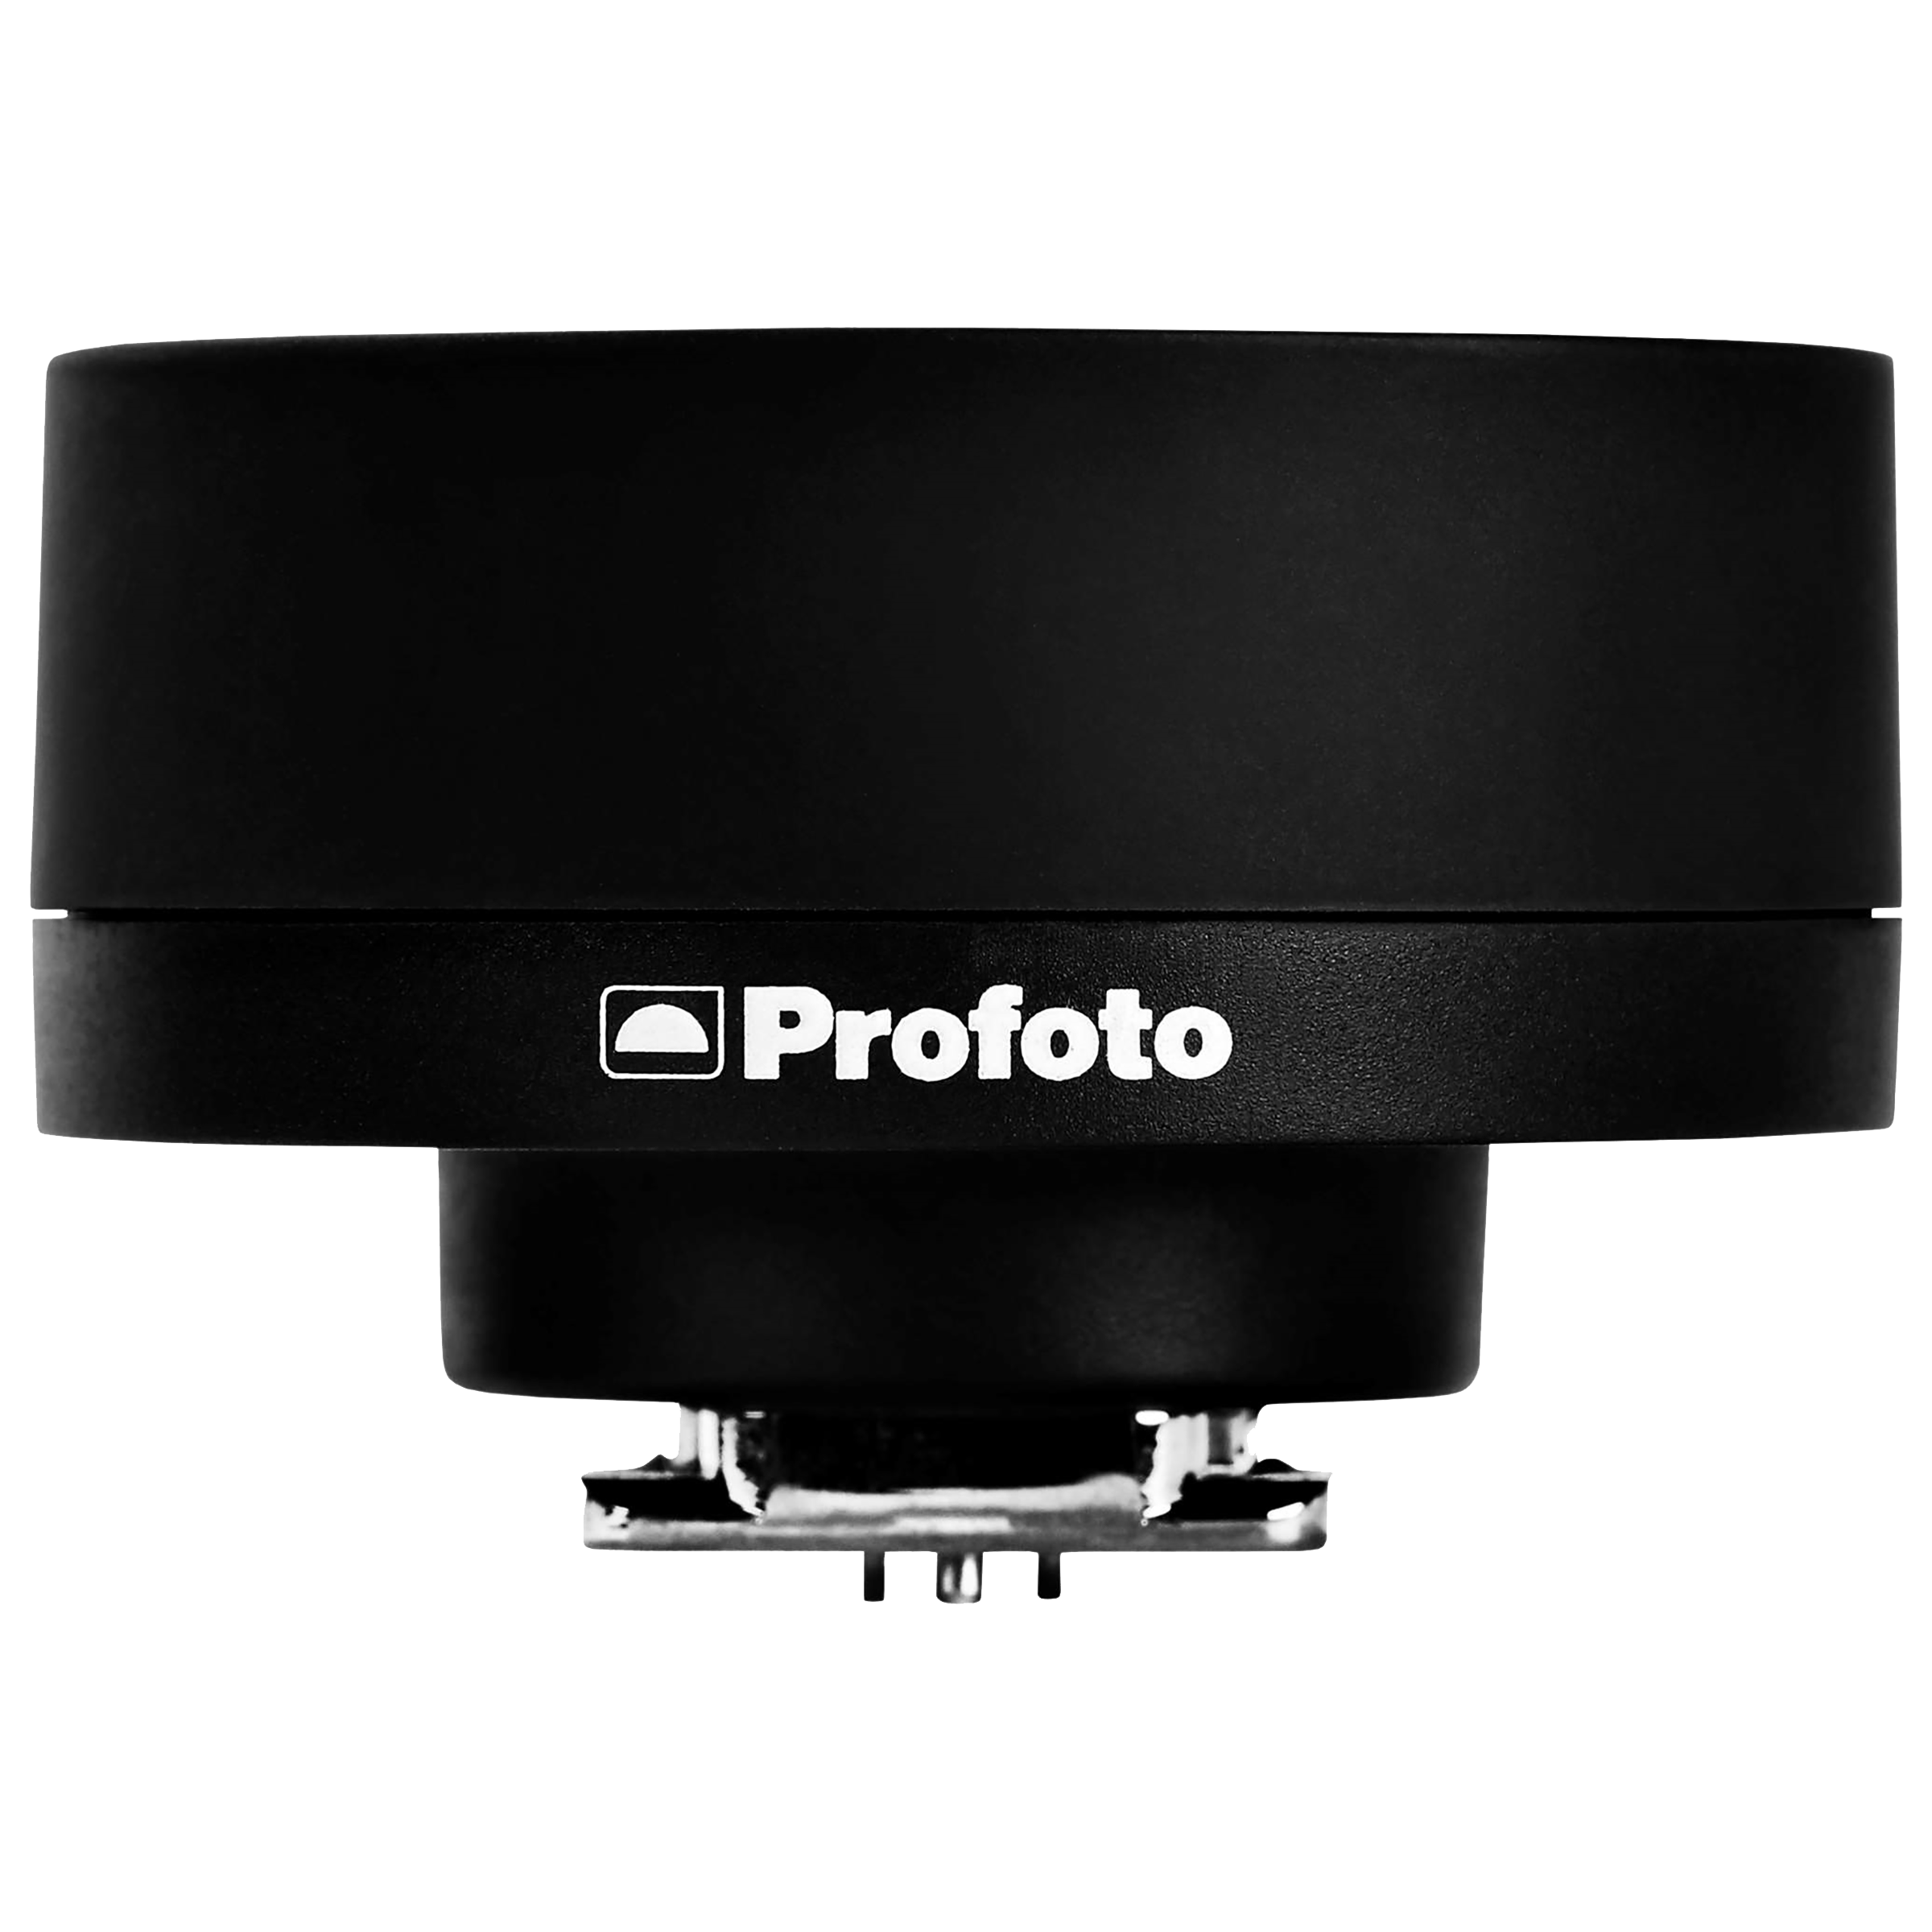 Profoto Connect Wireless Transmitter For Sony Cameras (2.4 GHz Radio Frequency Band, 901312, Black)_1